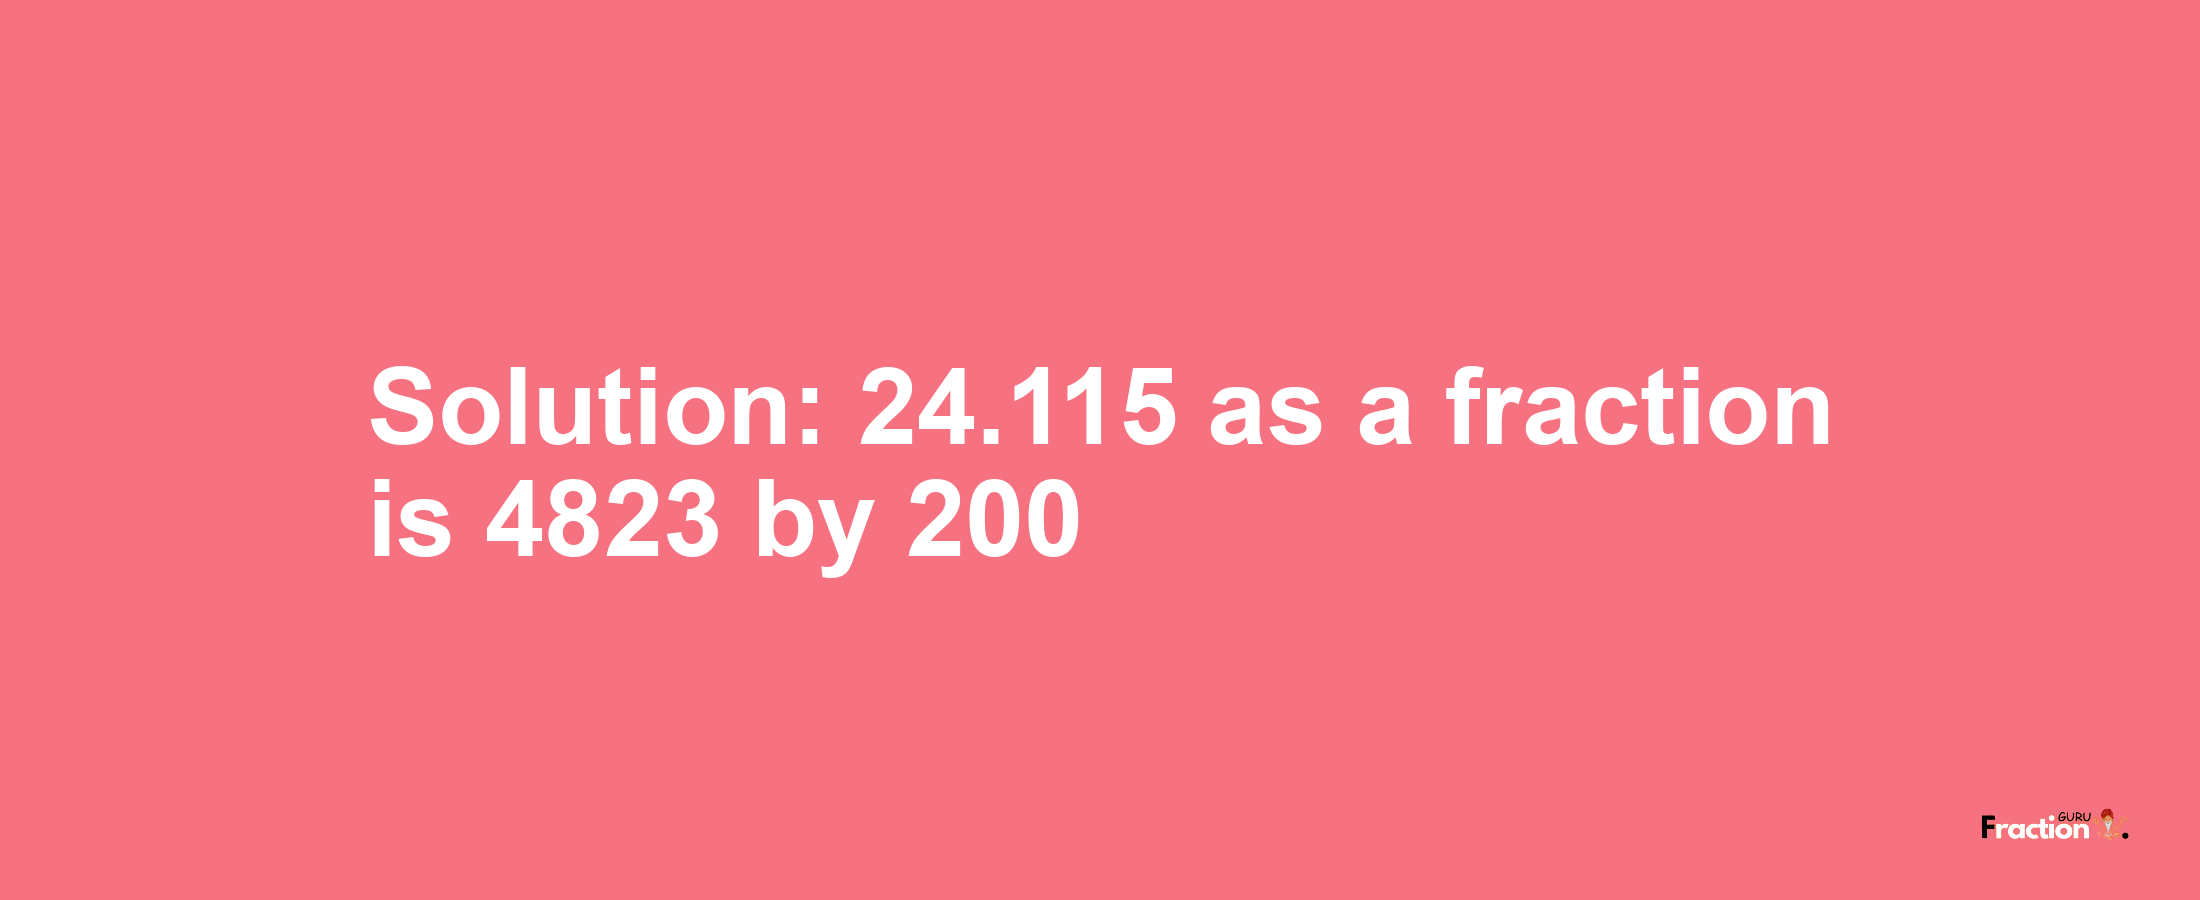 Solution:24.115 as a fraction is 4823/200